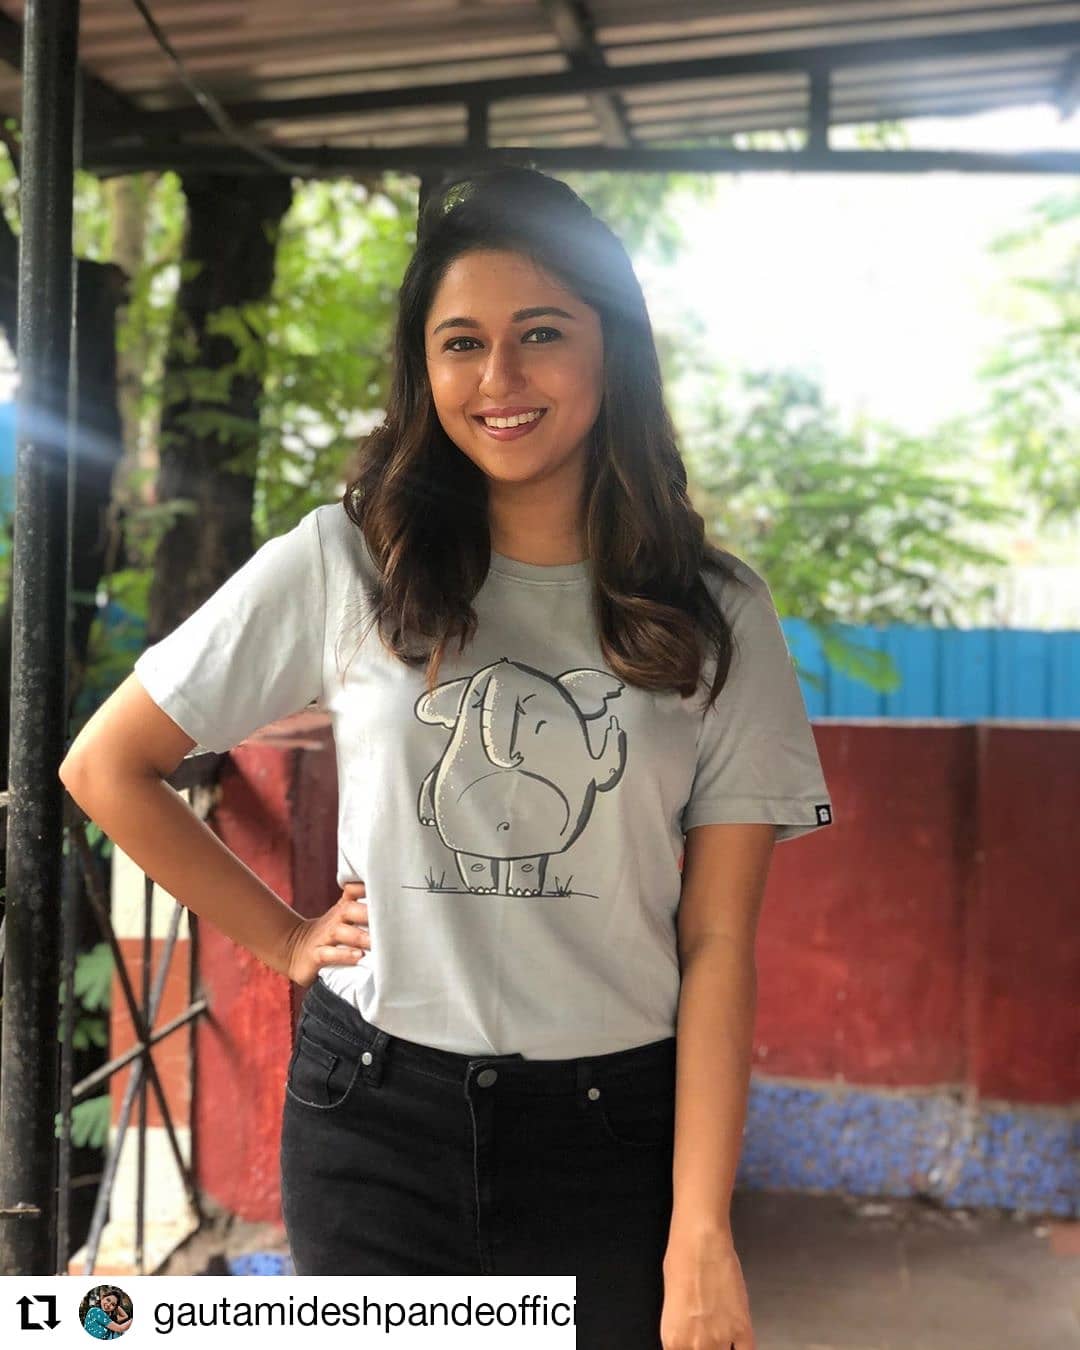 The Souled Store - Have you bought a tee from our 'wild' collection yet?

Every t-shirt from #SaveTheirSouls collection helps fund the conservation of endangered Indian animals.

Click on the link in...